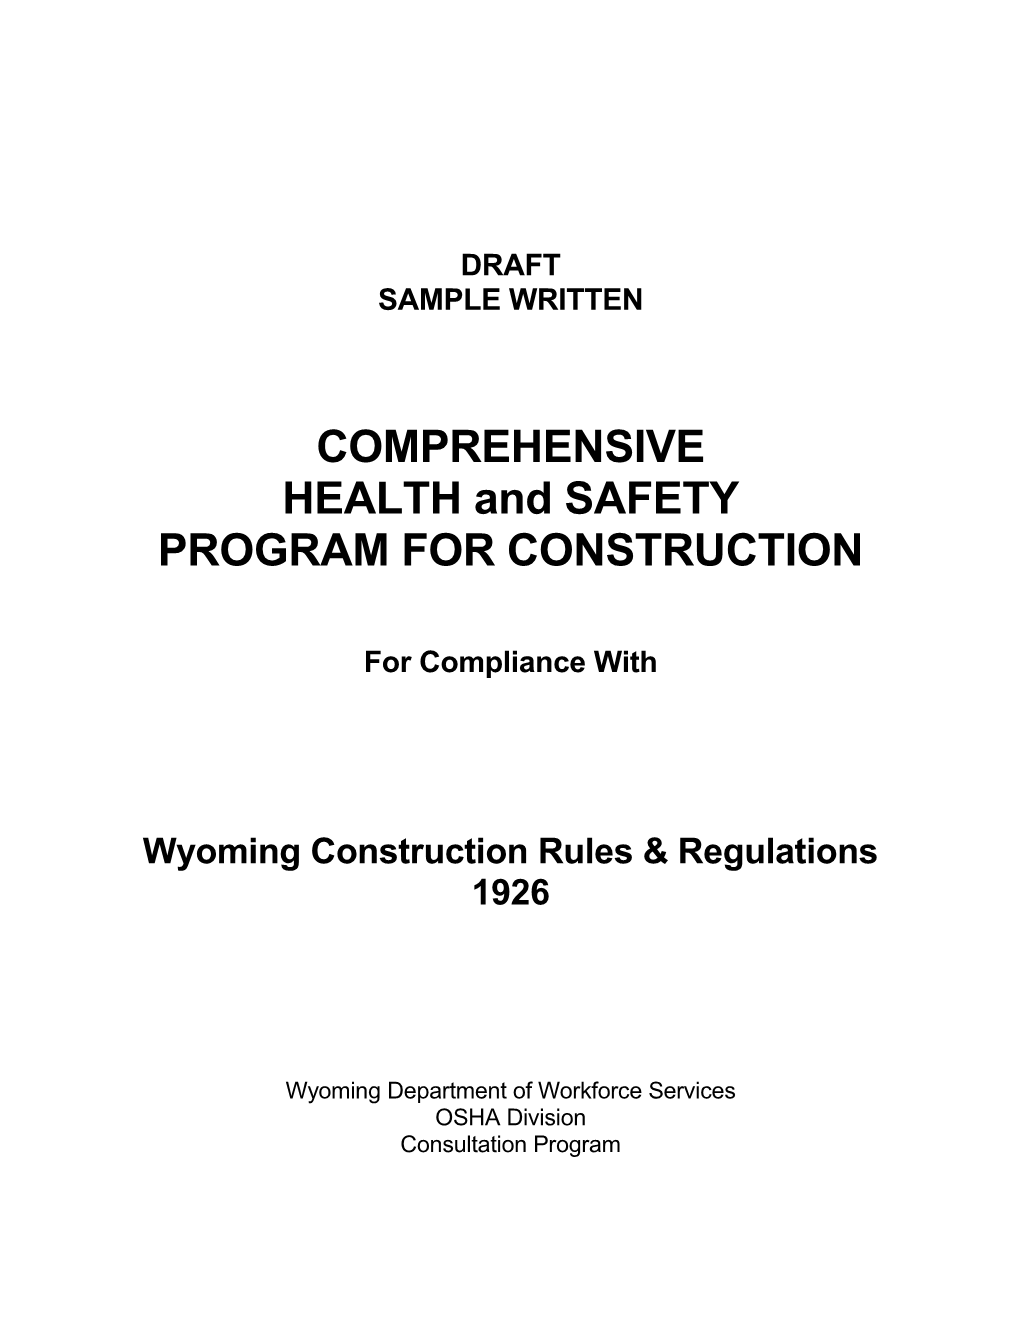 Wyoming Construction Rules & Regulations